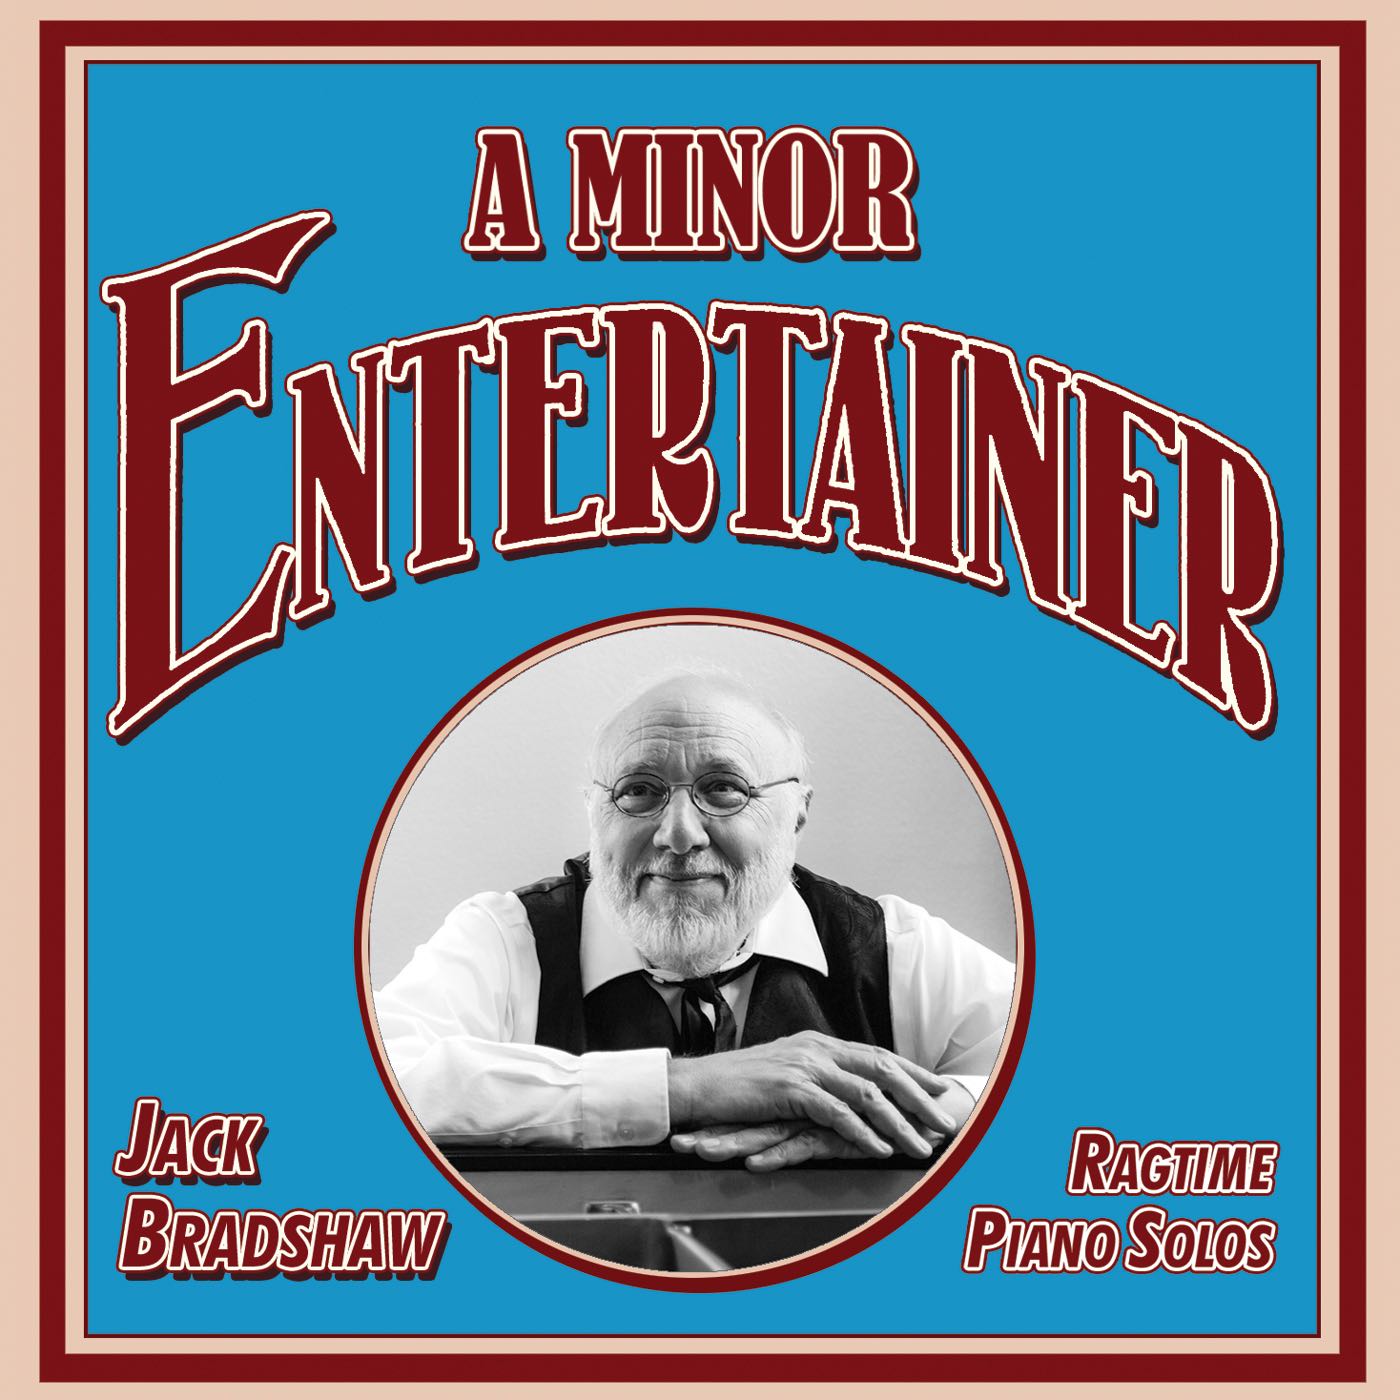 A Minor Entertainer